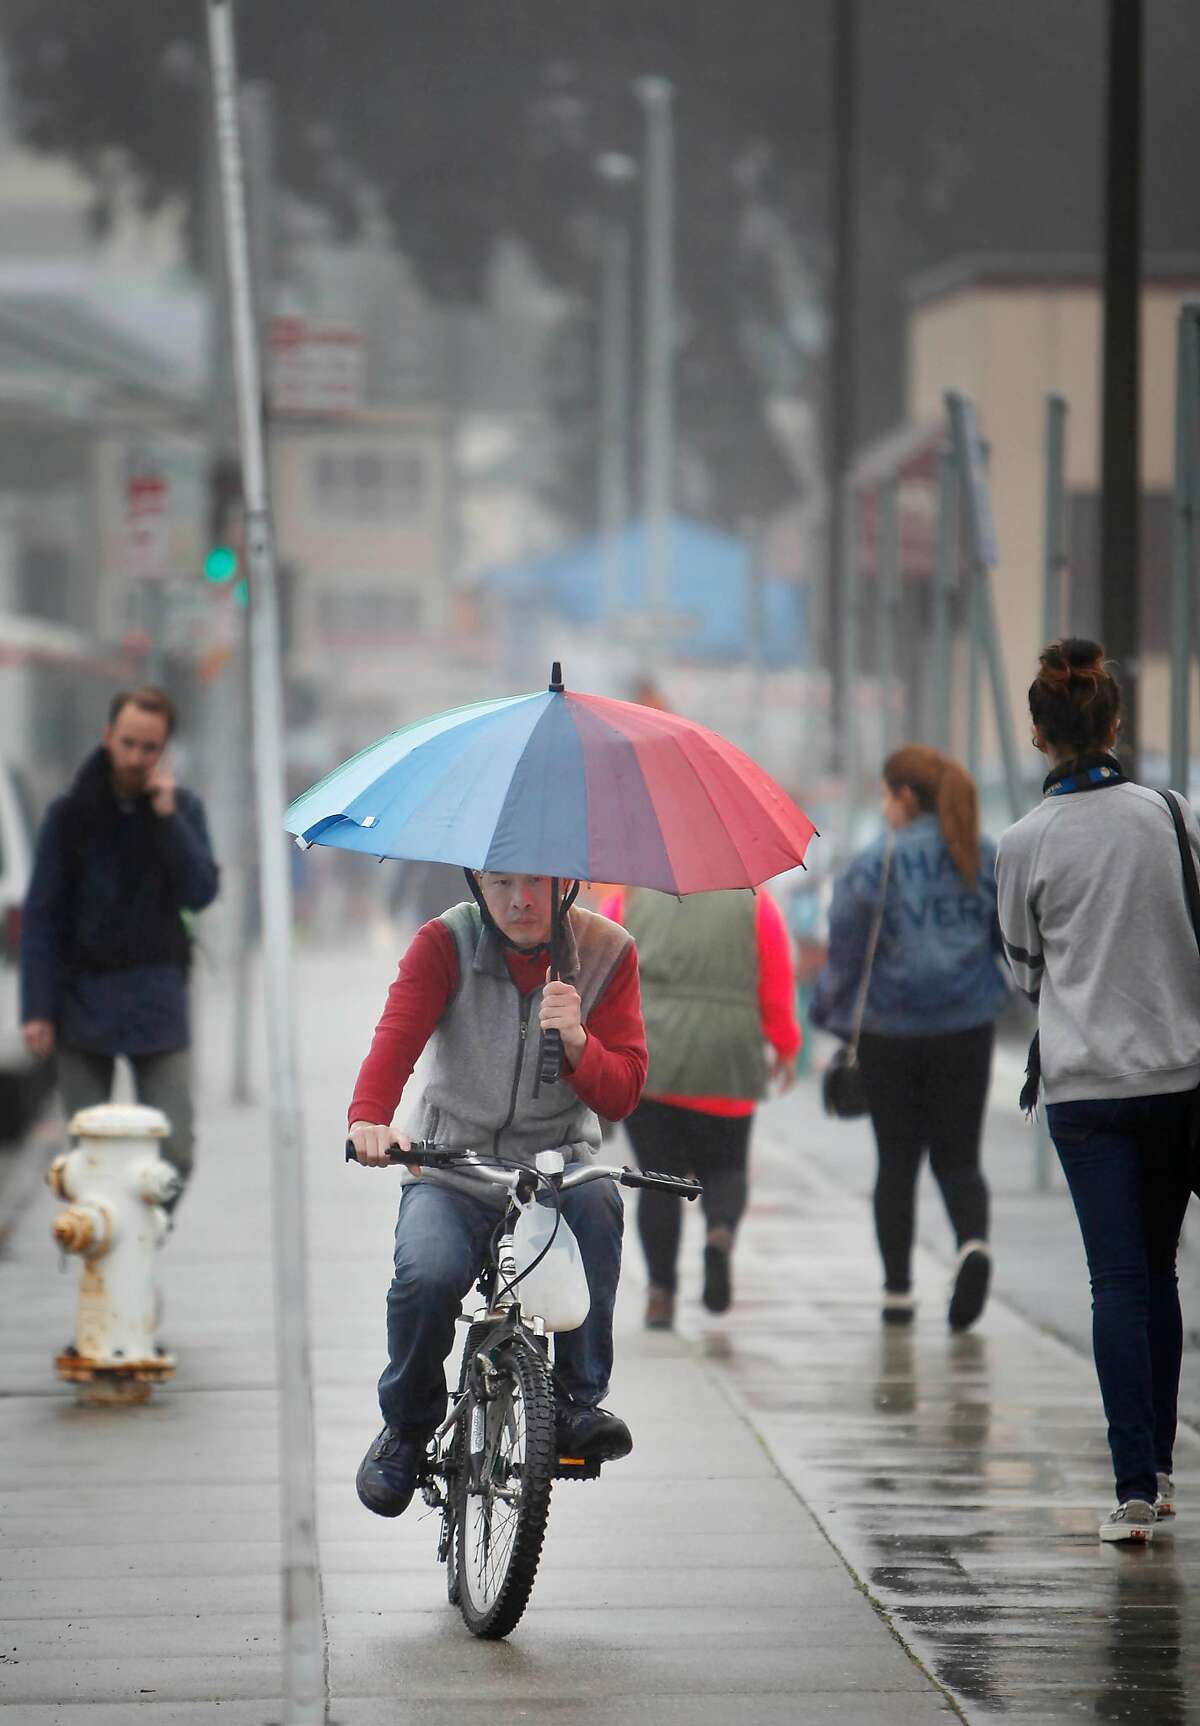 A bicyclist carries an umbrella in a light rain as he rides on the sidewalk along Phelan Avenue on Wednesday, January 29, 2014 in San Francisco, Calif.